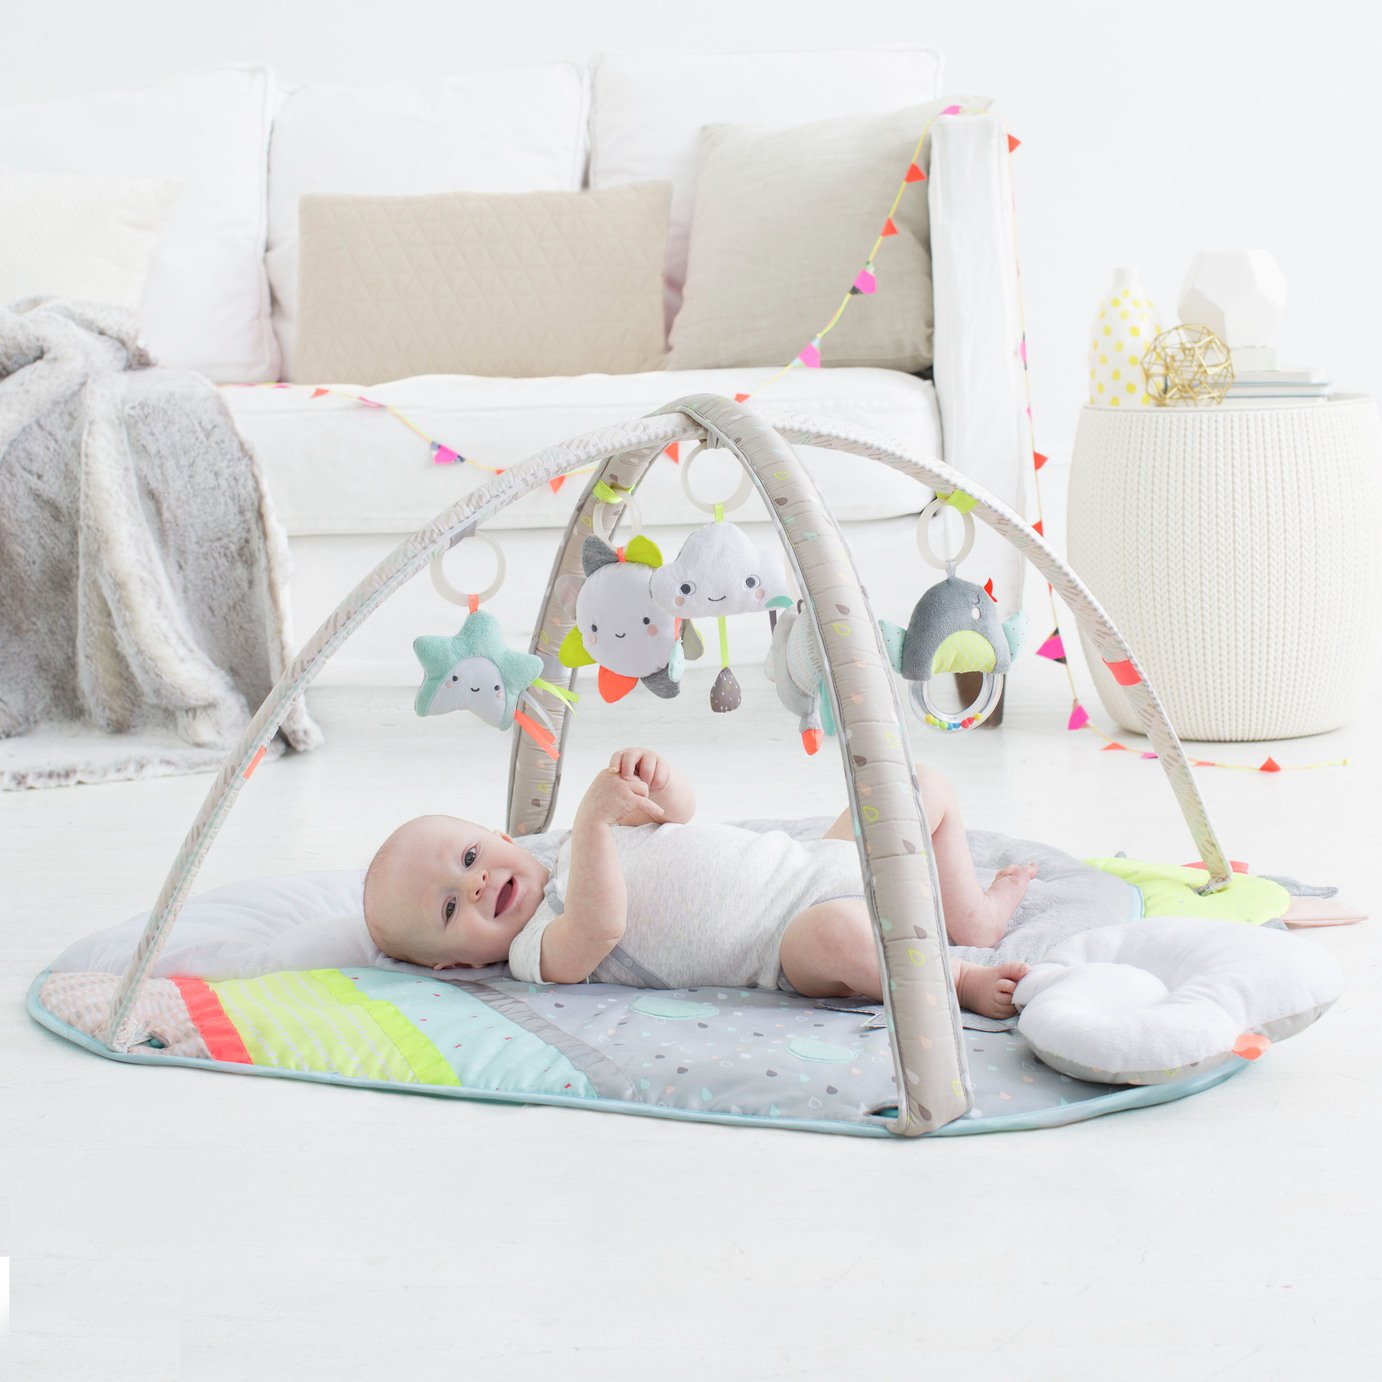 Skip Hop Silver Lining Activity Gym Review